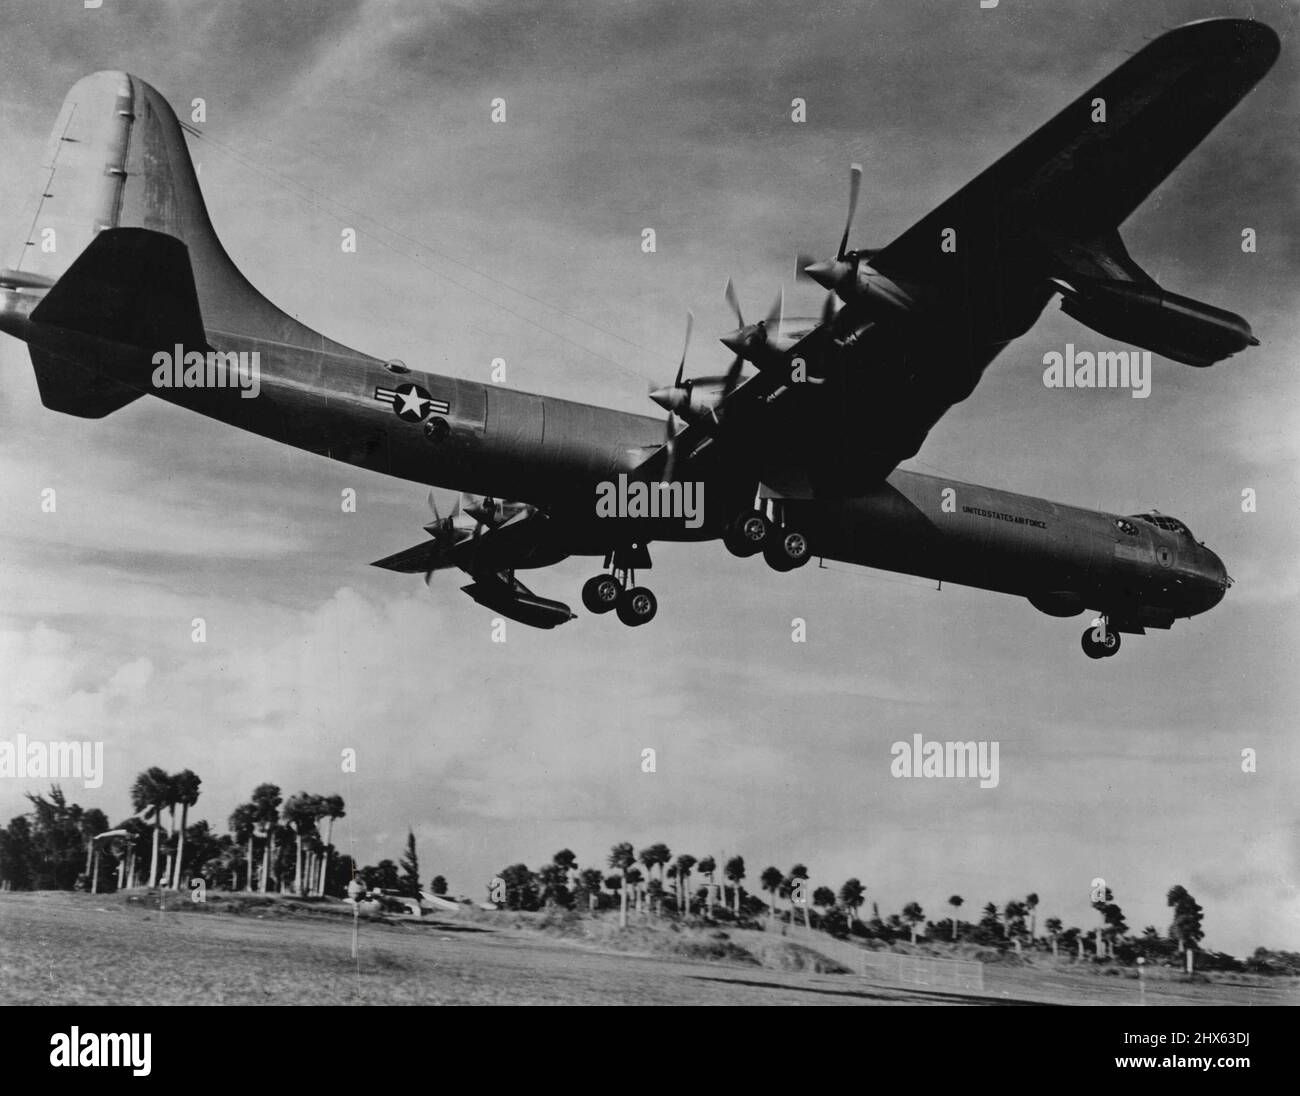 Supergiant of The Skies -- The World's first international bombers a 10 engine Convair B-36 - puts its two, huge, 4-wheel landing gears down for a landing at a tropical Air Force base. This supergiant of the skies has a wingspread of 230 feet-almost as long as a football field. Its length is 162 feet, and its height at the tail is nearly 47 feet or 5 stories high. With four J-47 jet engines nestled ***** its Six 3,500 horsepower reciprocating engines. This mighty Air Force bomber is capable of c Stock Photo